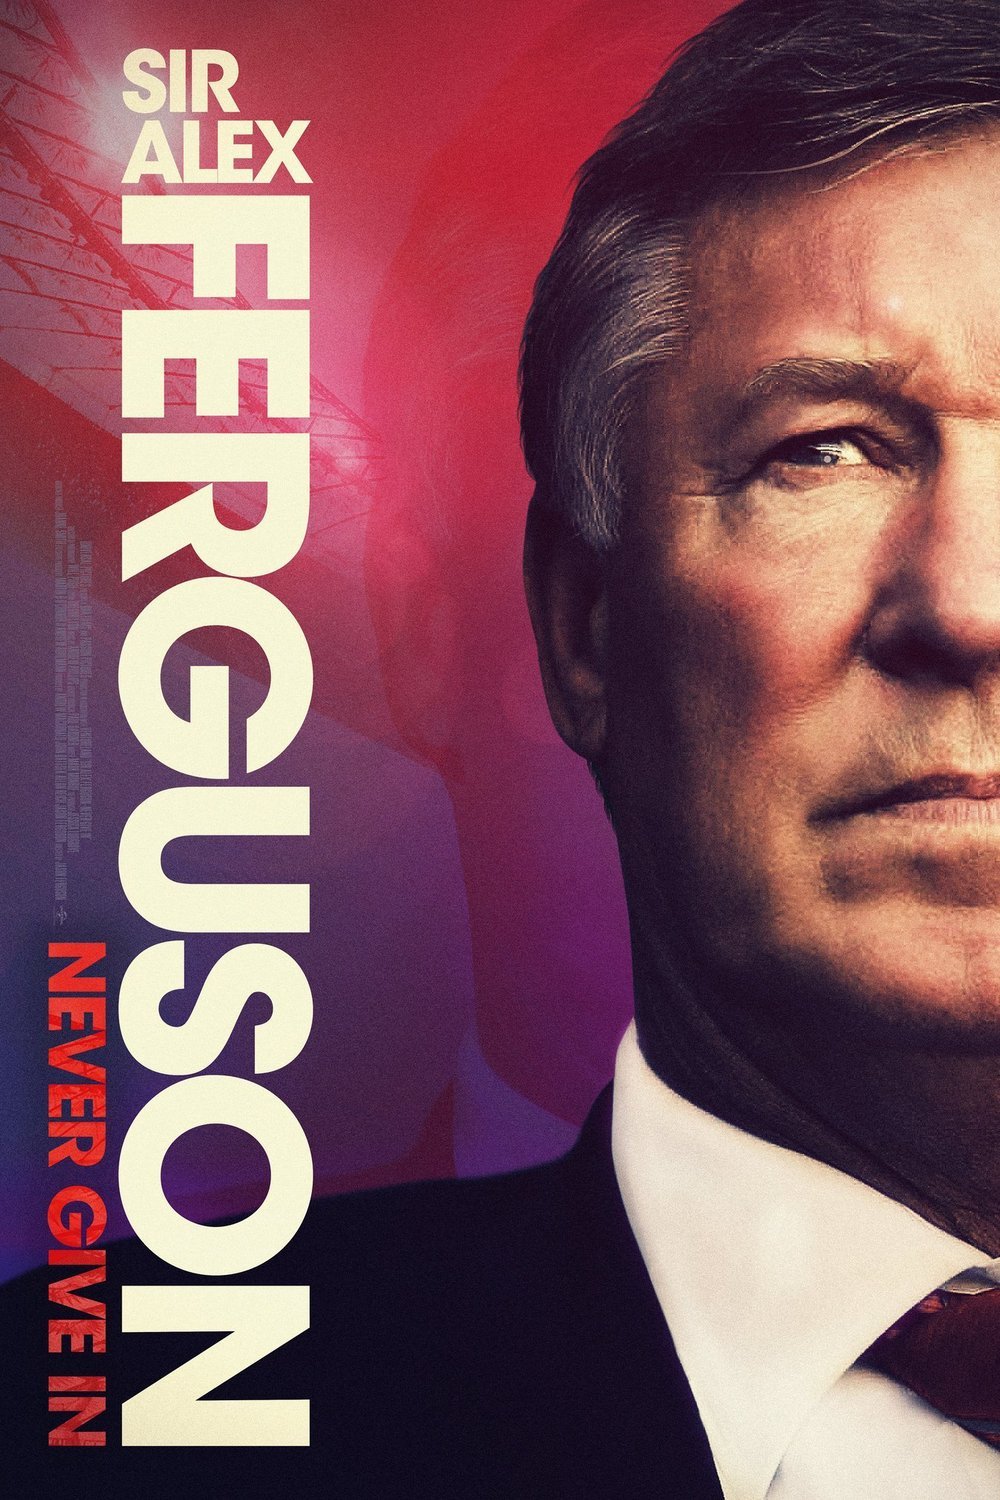 Poster of the movie Sir Alex Ferguson: Never Give in